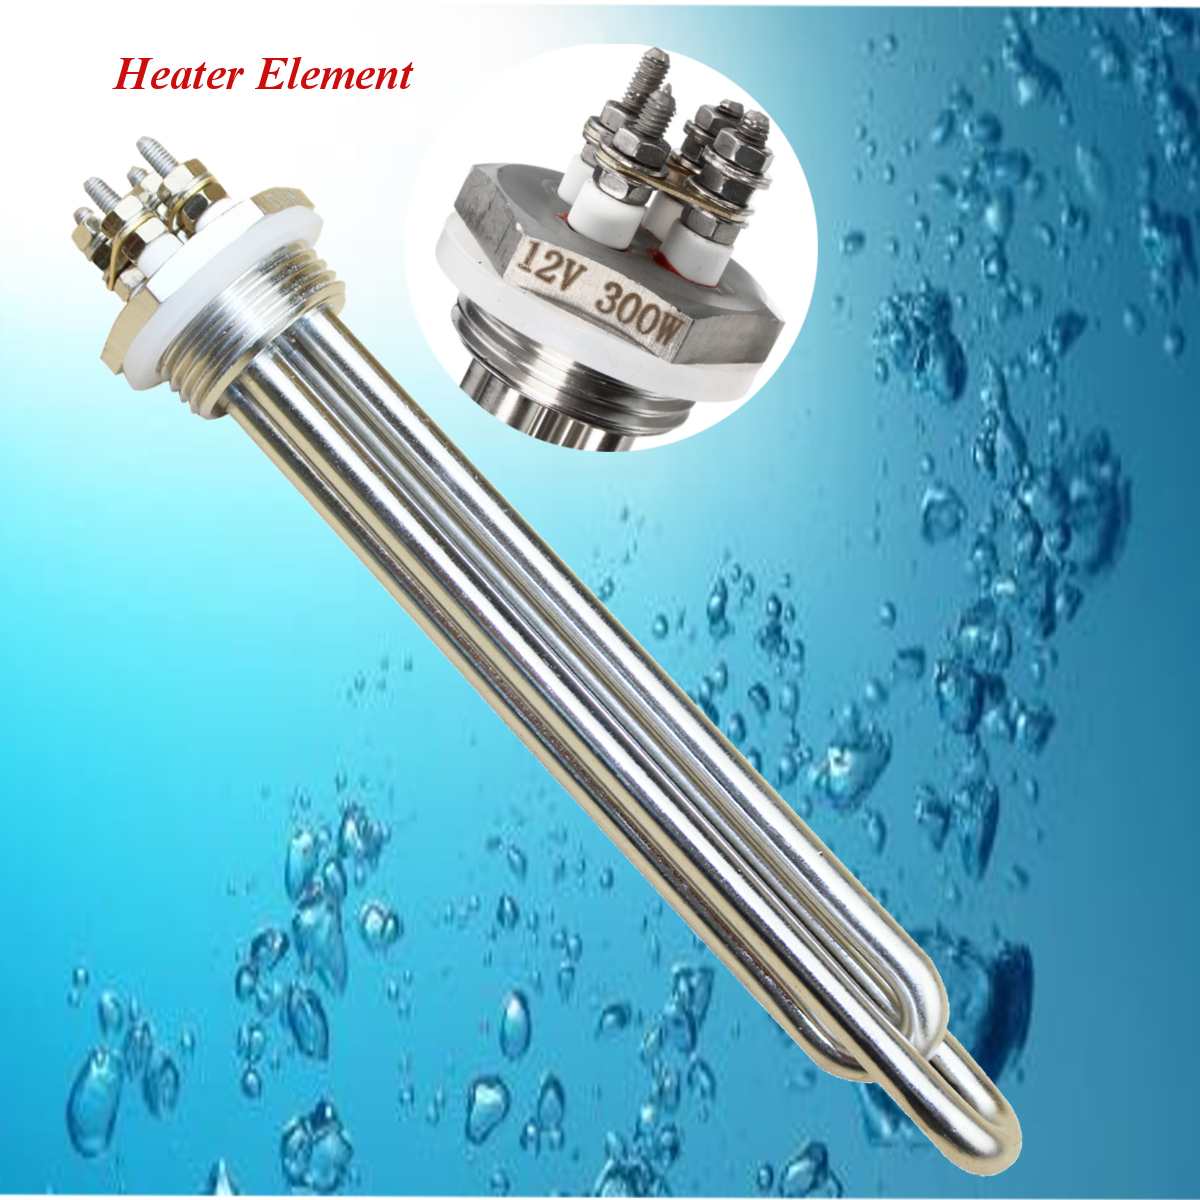 Thread Heating Pipe Replacement Electric Heating Element Immersion 12V 300W Heater Stainless Steel Boiler Water Heater